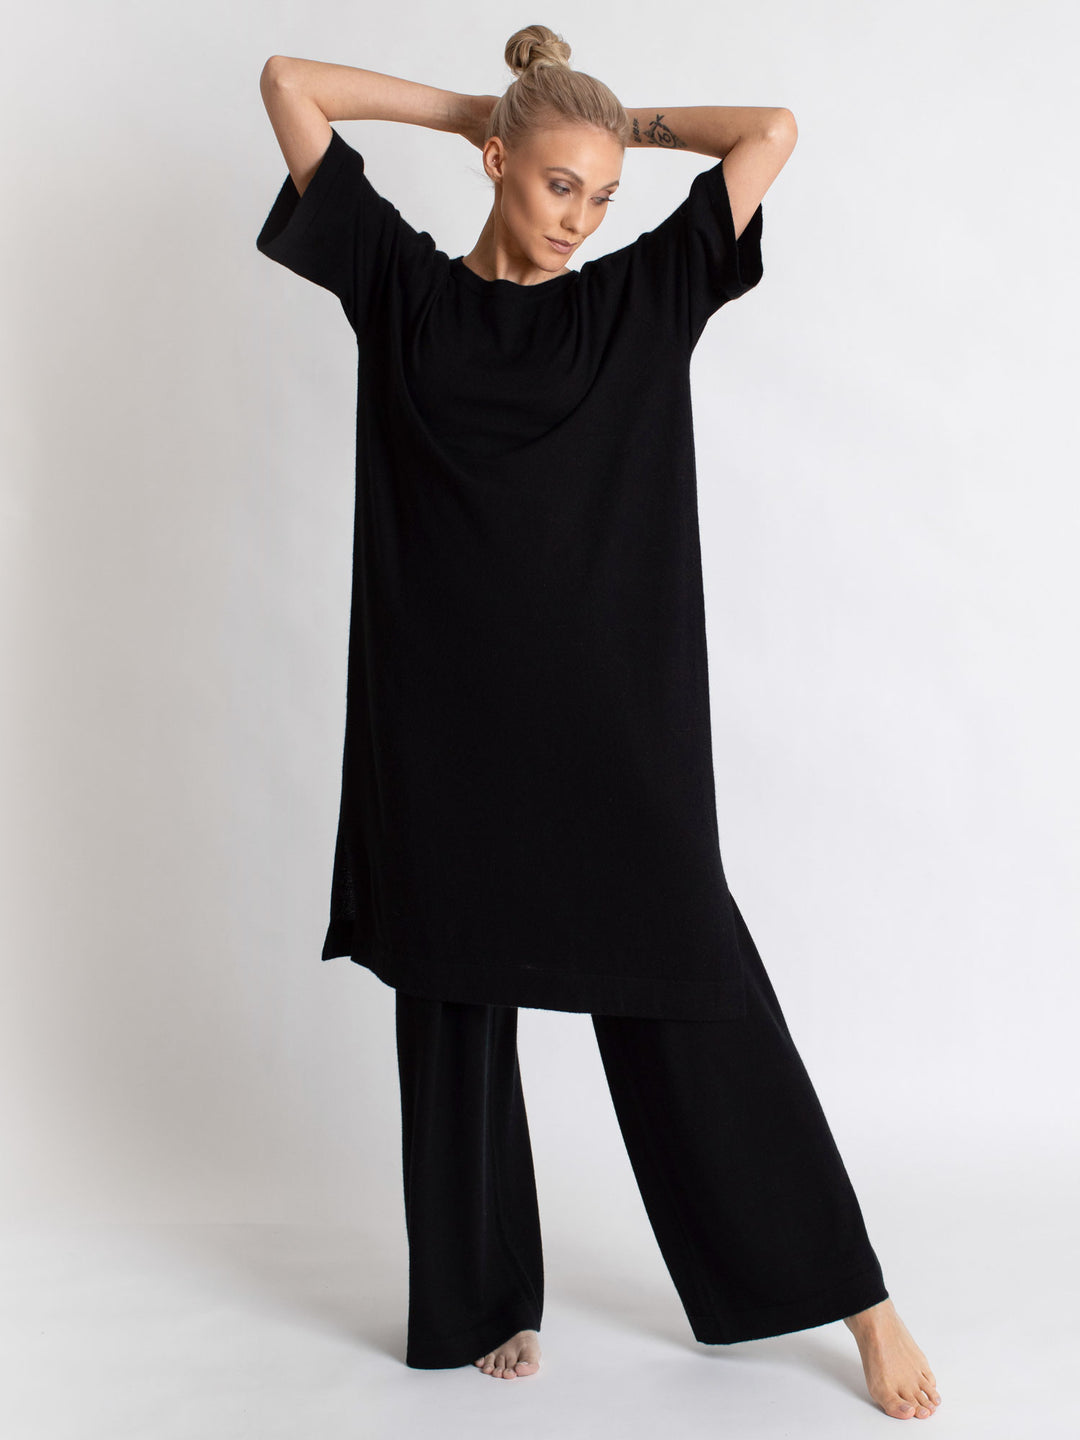 Anona Tall Mid Rise Modal Cashmere Blend Trousers in Black